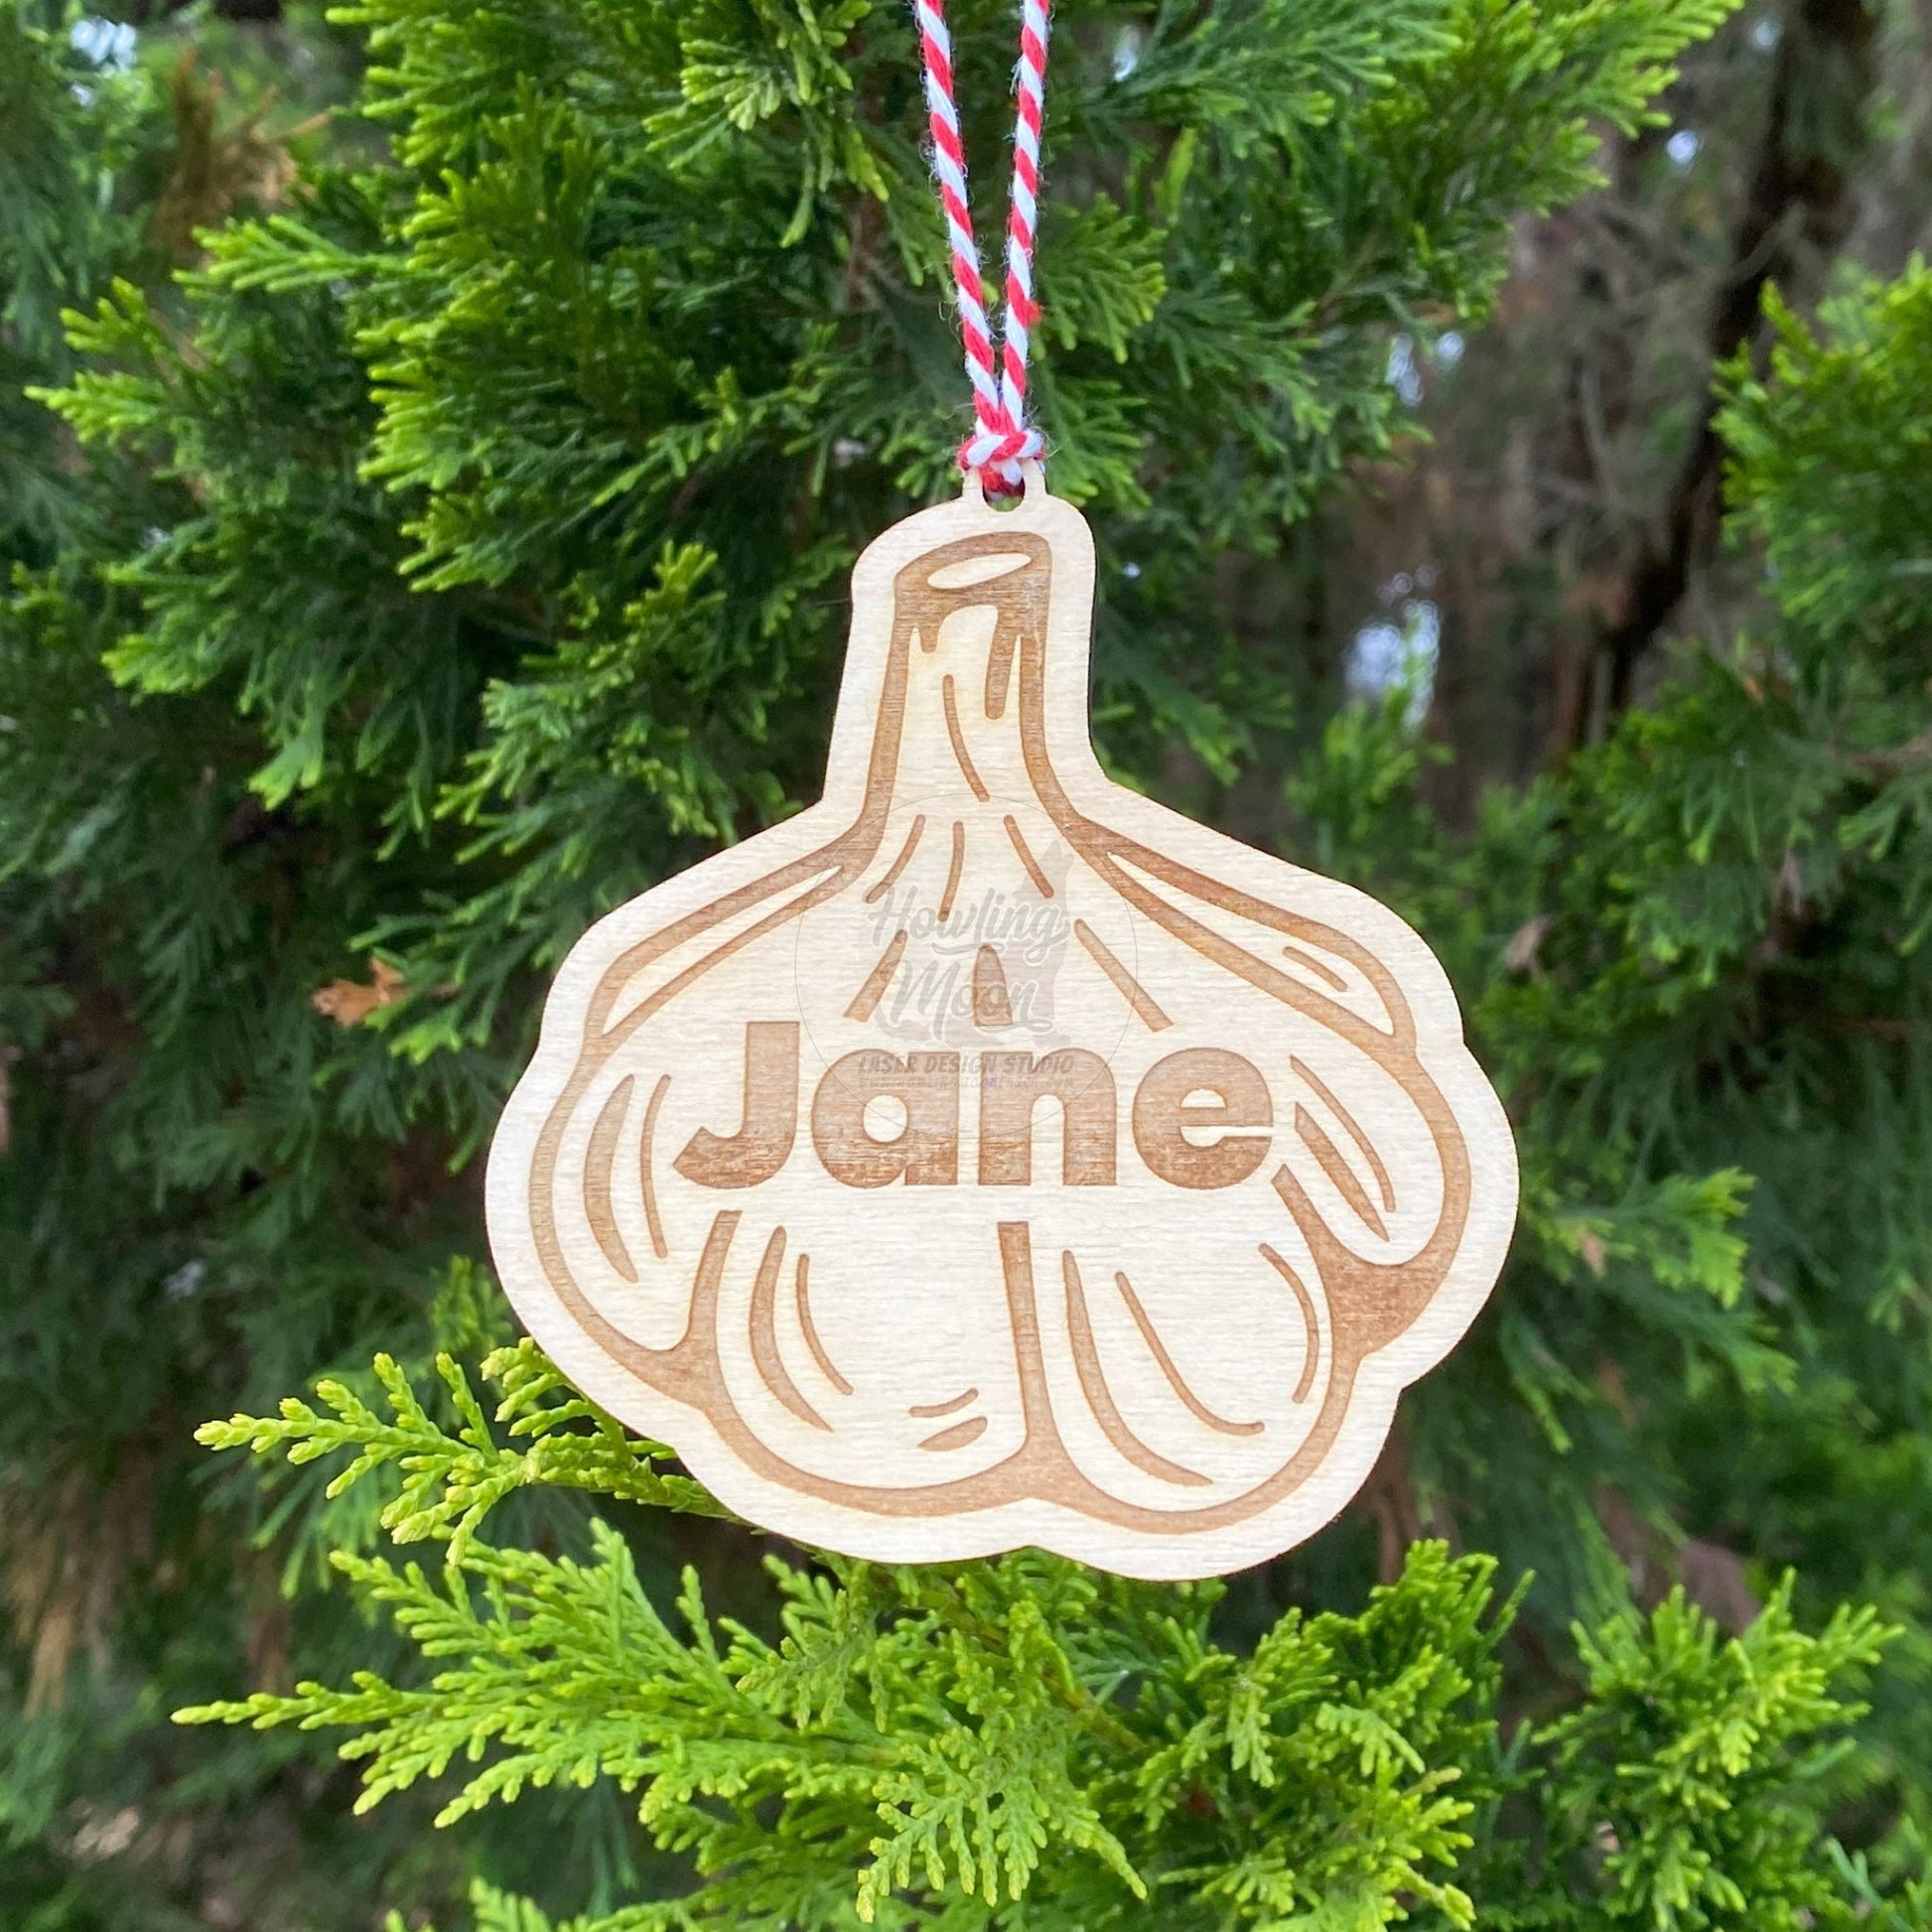 Personalized garlic ornament hangs from a tree branch with red & white twine. Handcrafted by Howling Moon Laser Design Studio in Virginia, USA